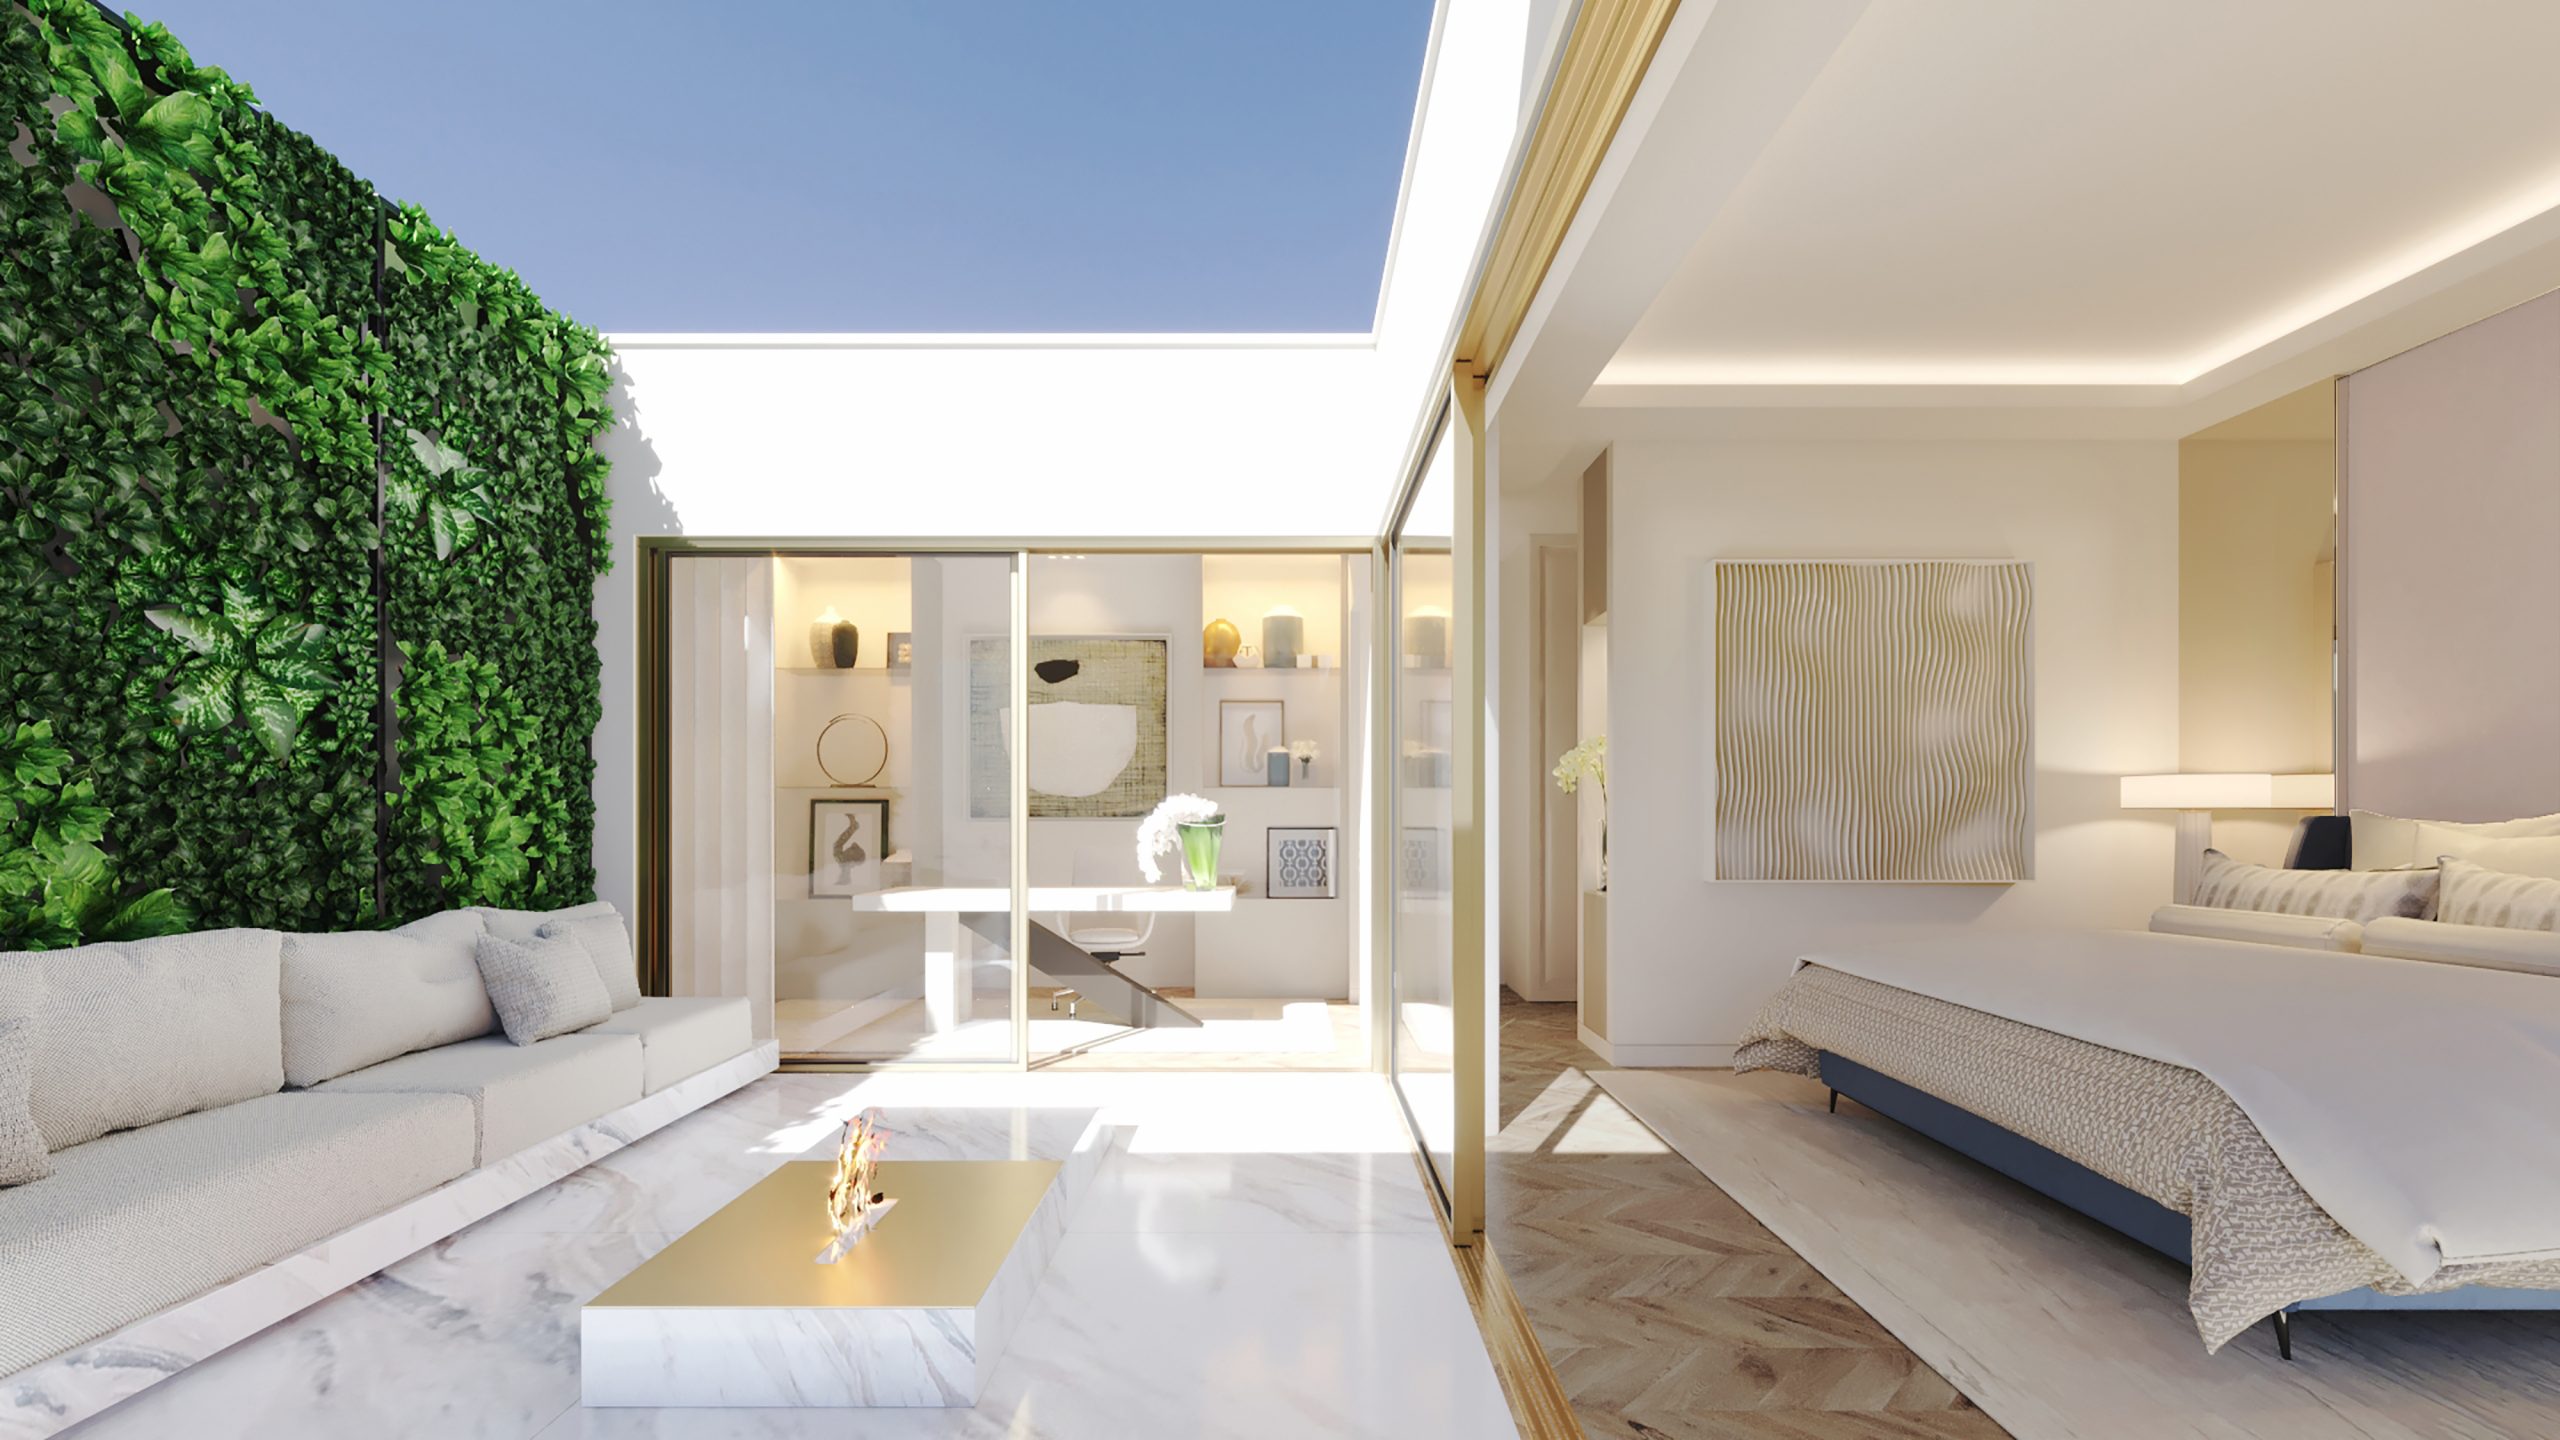 Legacy Townhouses Master Suite 1 By Gavinho Scaled, Design Authority